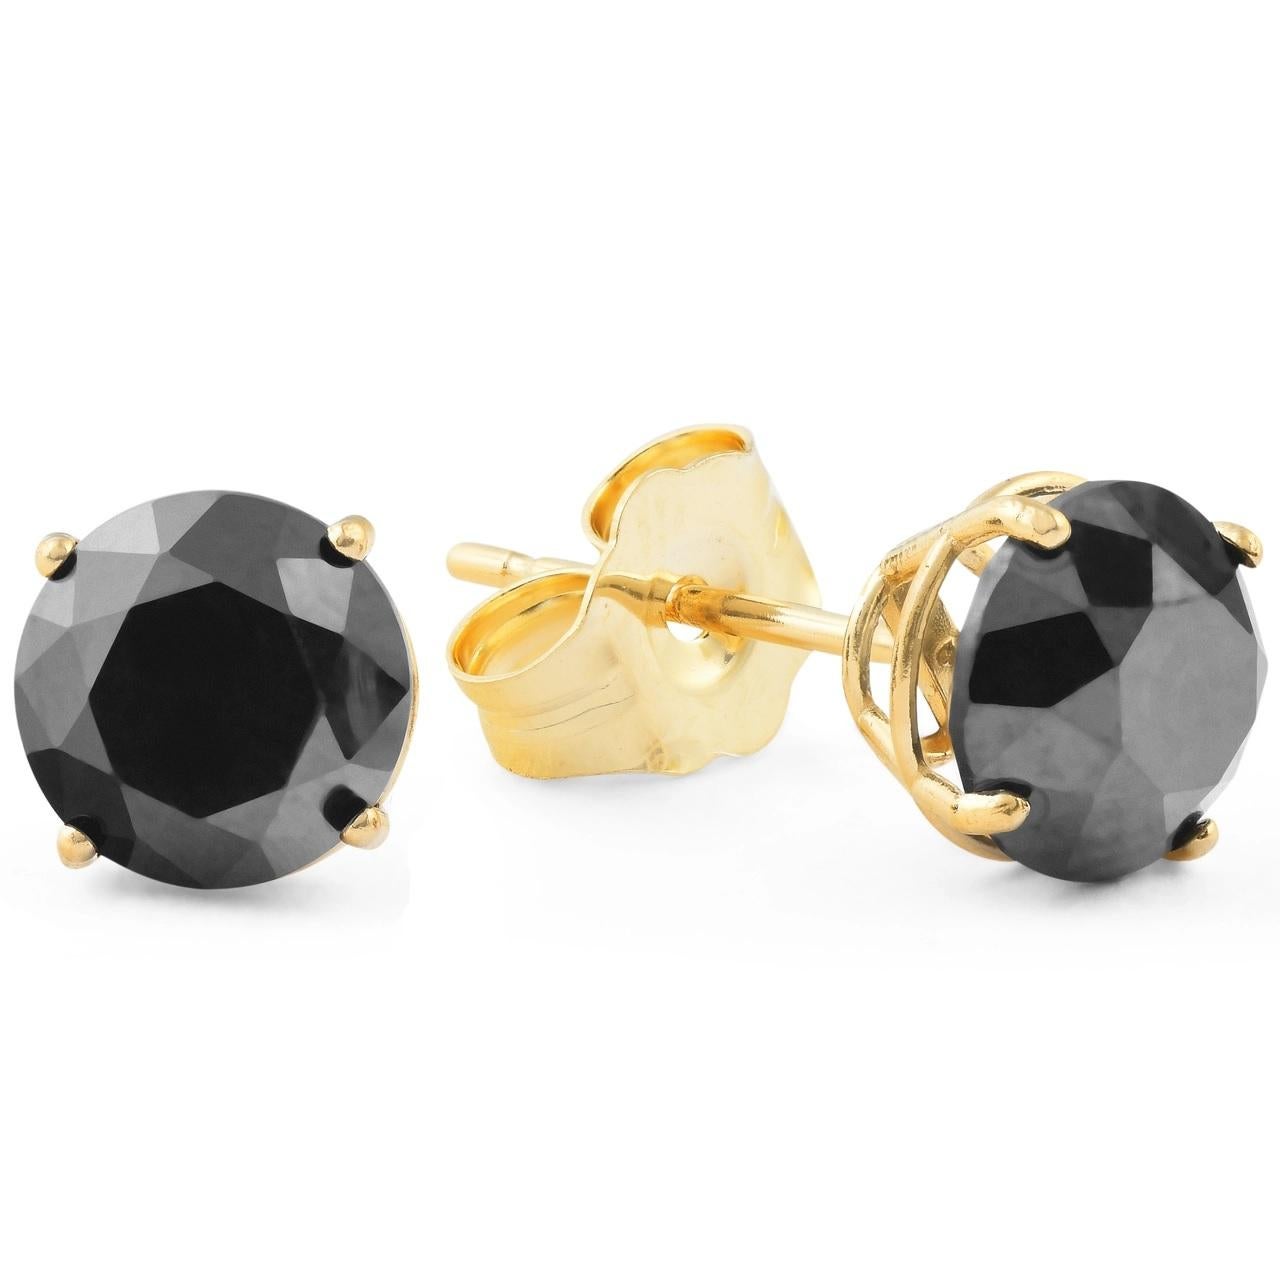 Make a daring statement with these spectacular diamond solitaire earrings. Crafted in 14K yellow gold, each earring showcases an alluring 4.4 mm mm natural round black diamond of in a four-prong setting. Impressive with 0.8 carat total weight of